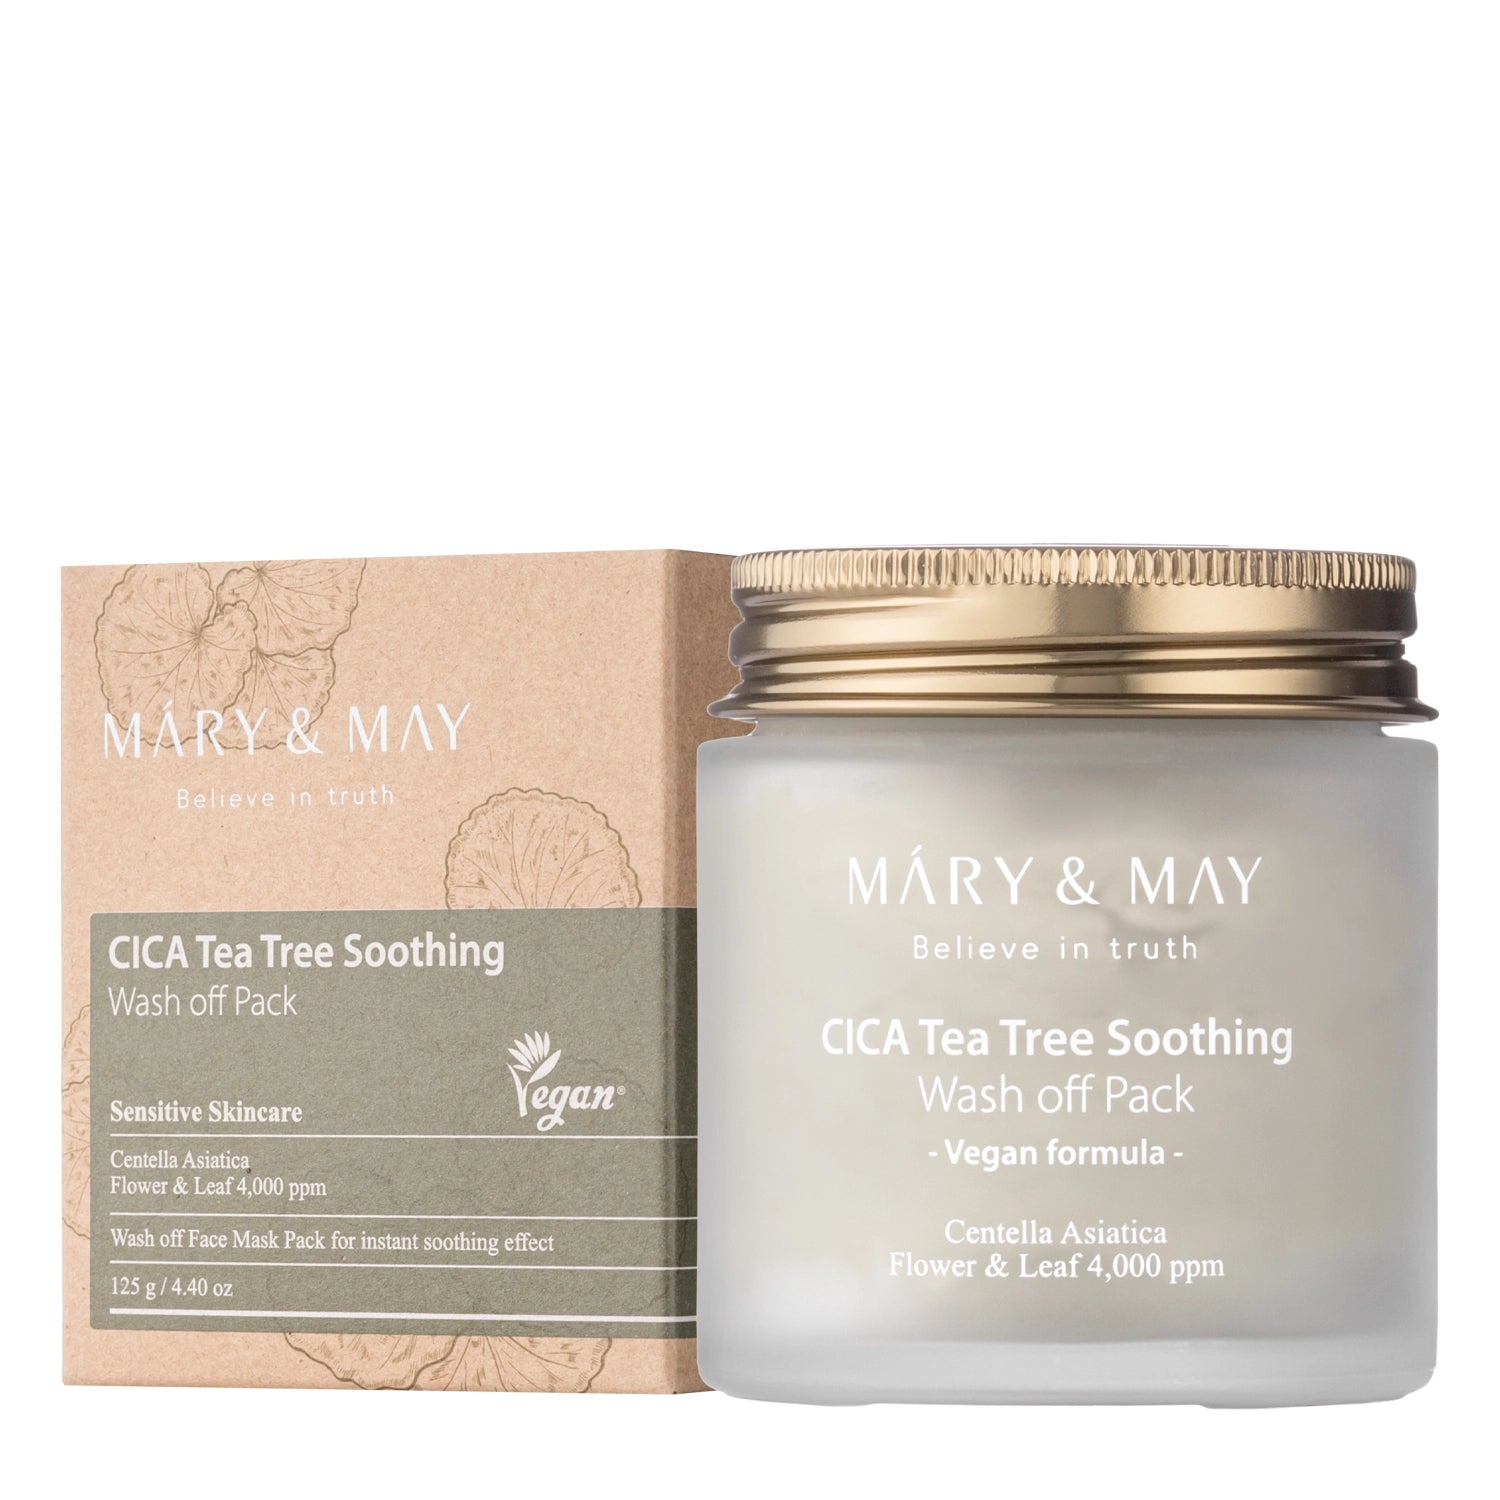 MARY & MAY - Cica Tea Tree Soothing Wash Off Pack